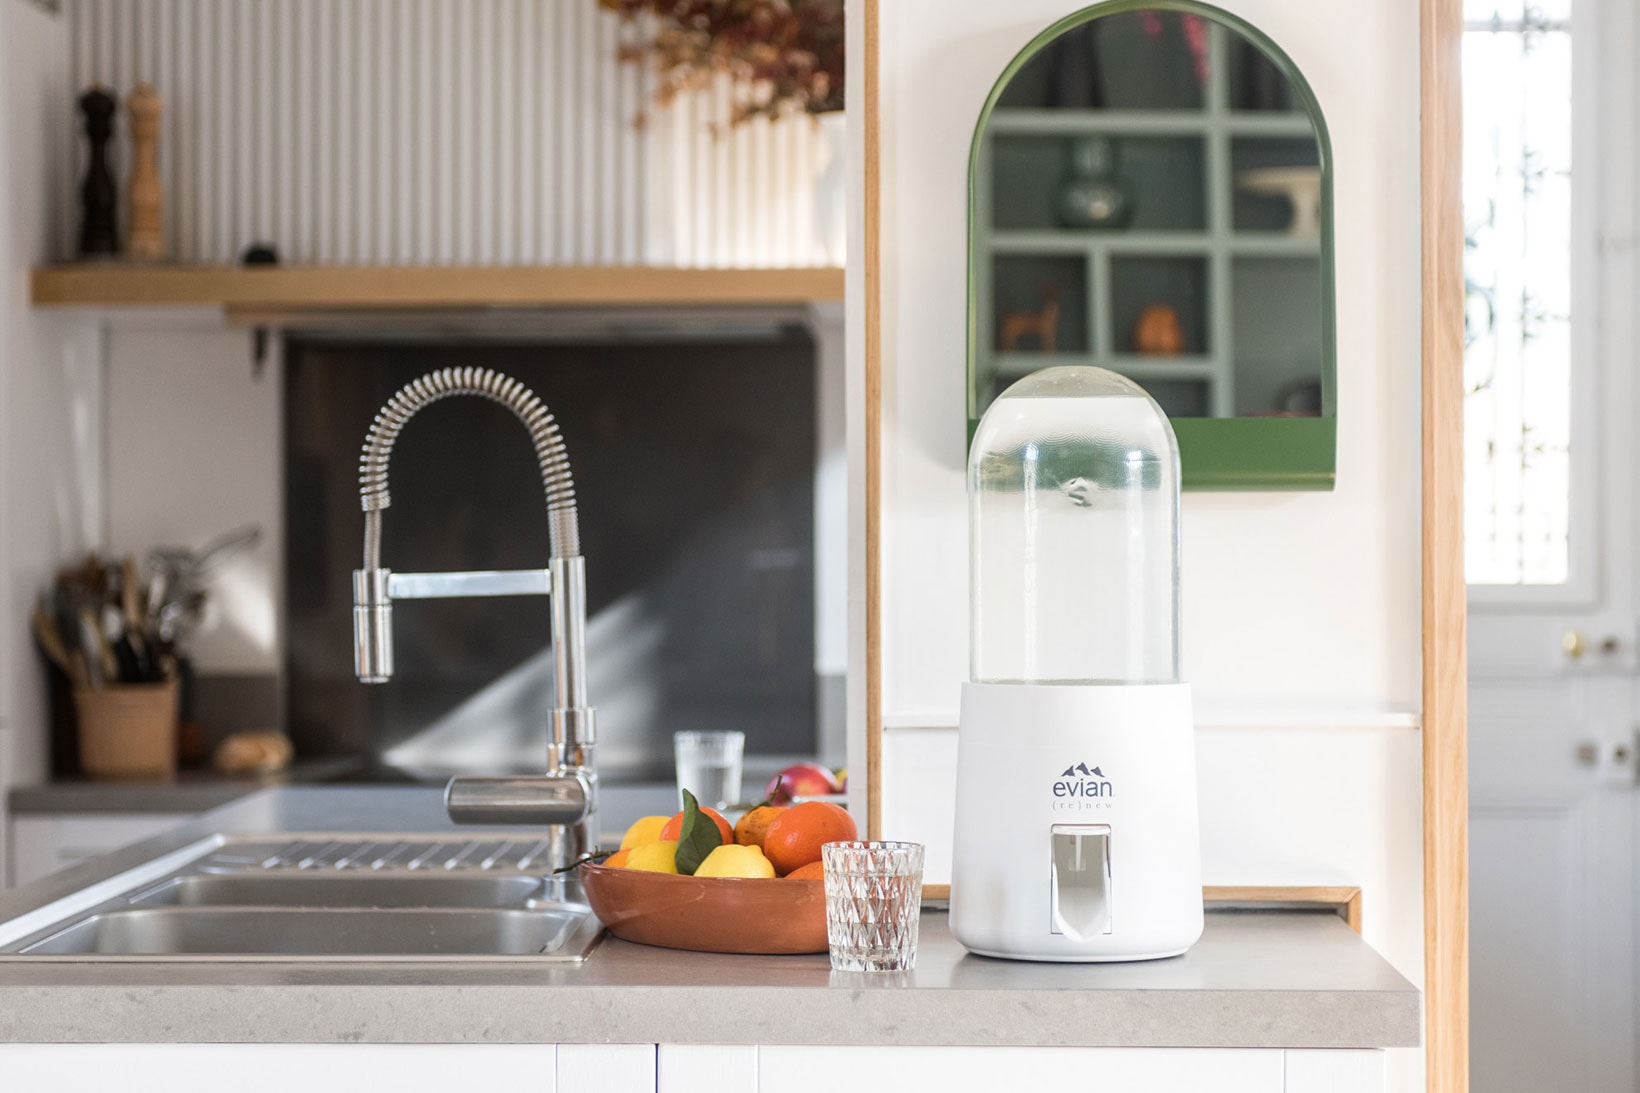 virgil abloh renew water fountain design sustainable home kitchentop